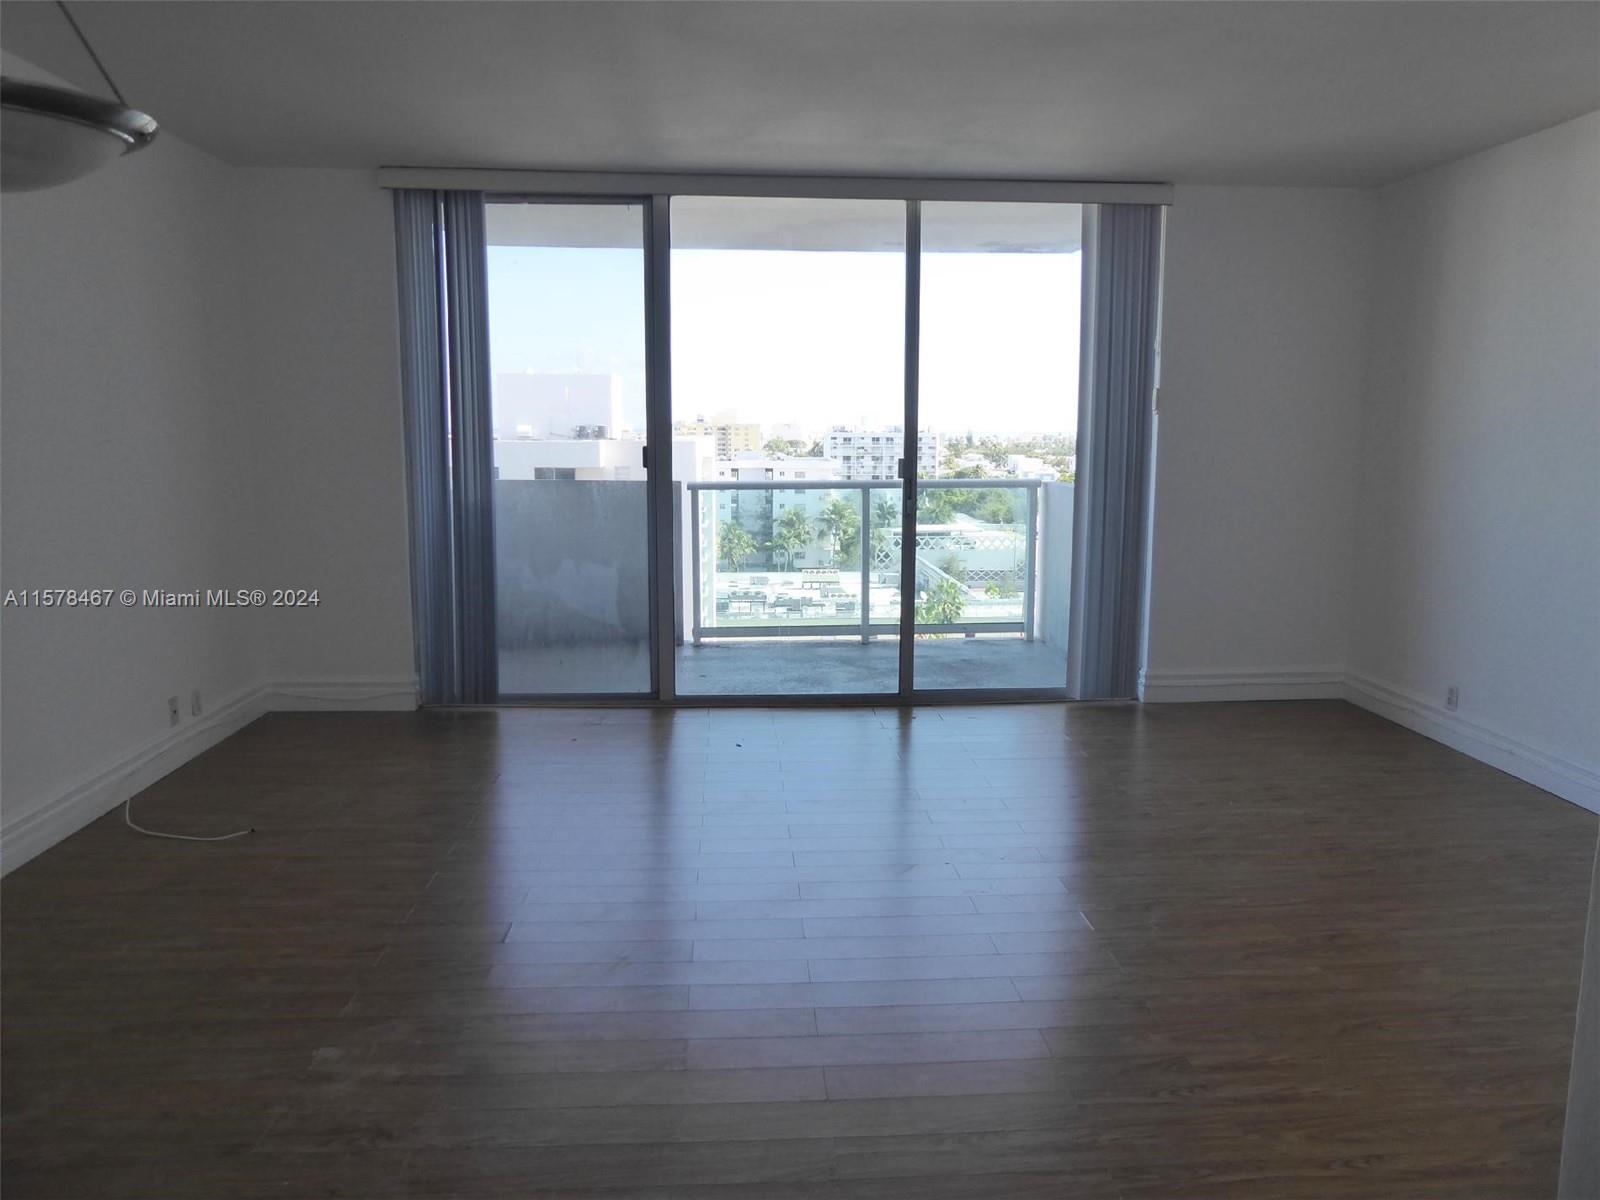 Spacious studio with an open view of Miami Beach. Unit has lots of closet space and private balcony. Full service building!! Amenities include bay front pool, state of the art gym, valet, 24/7 concierge, mini market, and more! Valet parking available at $85 per month. Seller will pay off special assessments at closing.